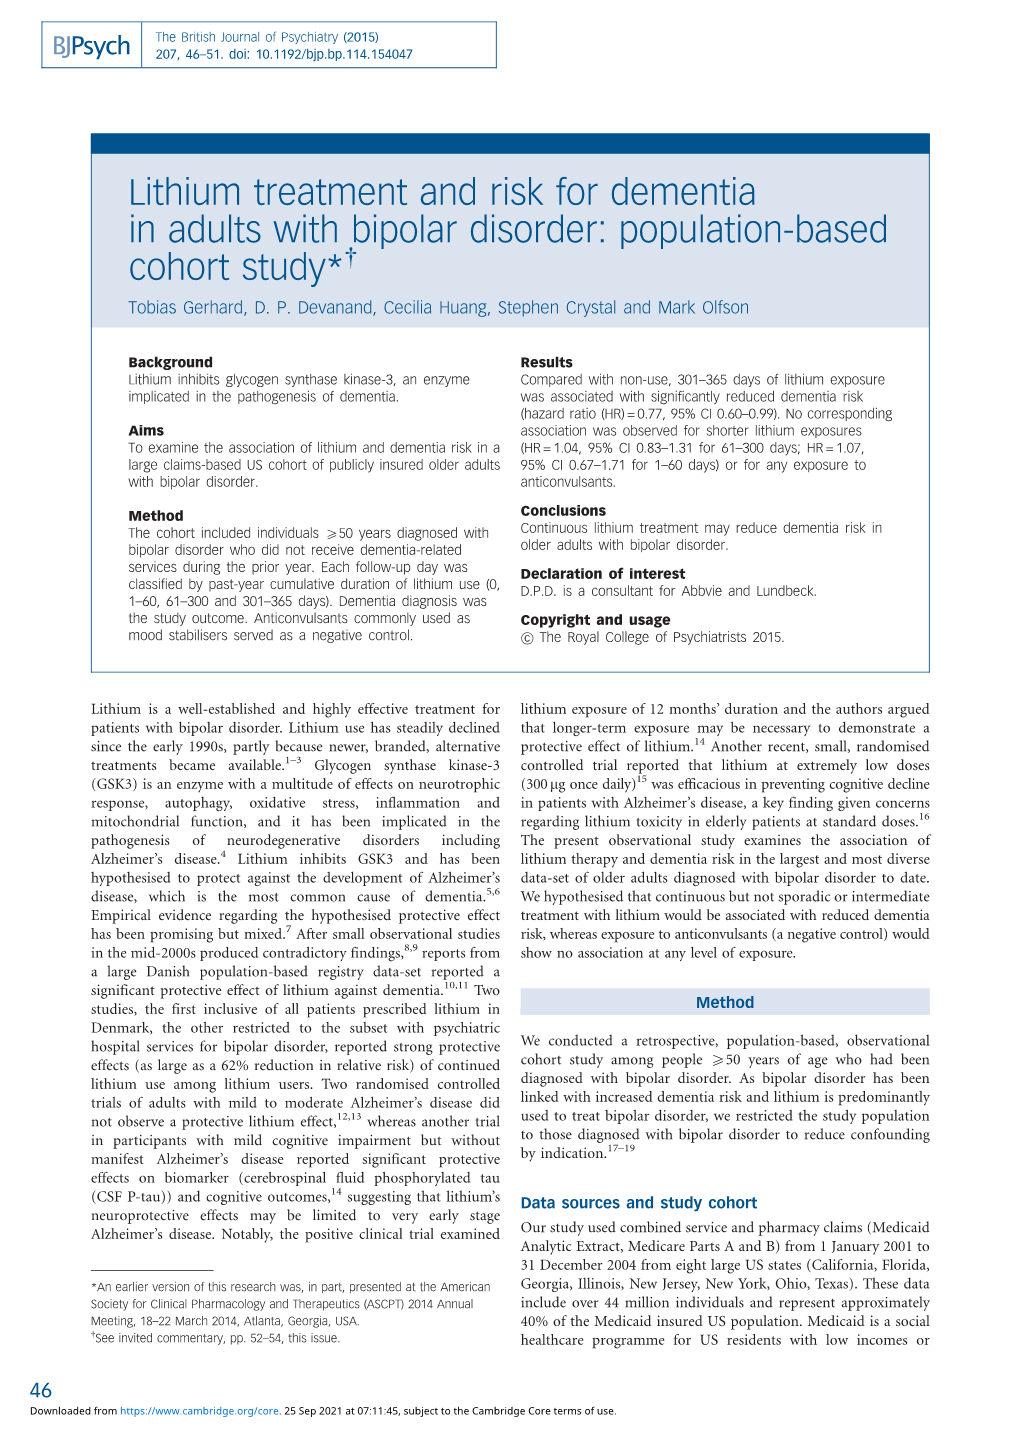 Lithium Treatment and Risk for Dementia in Adults with Bipolar Disorder: Population-Based Cohort Study*{ Tobias Gerhard, D